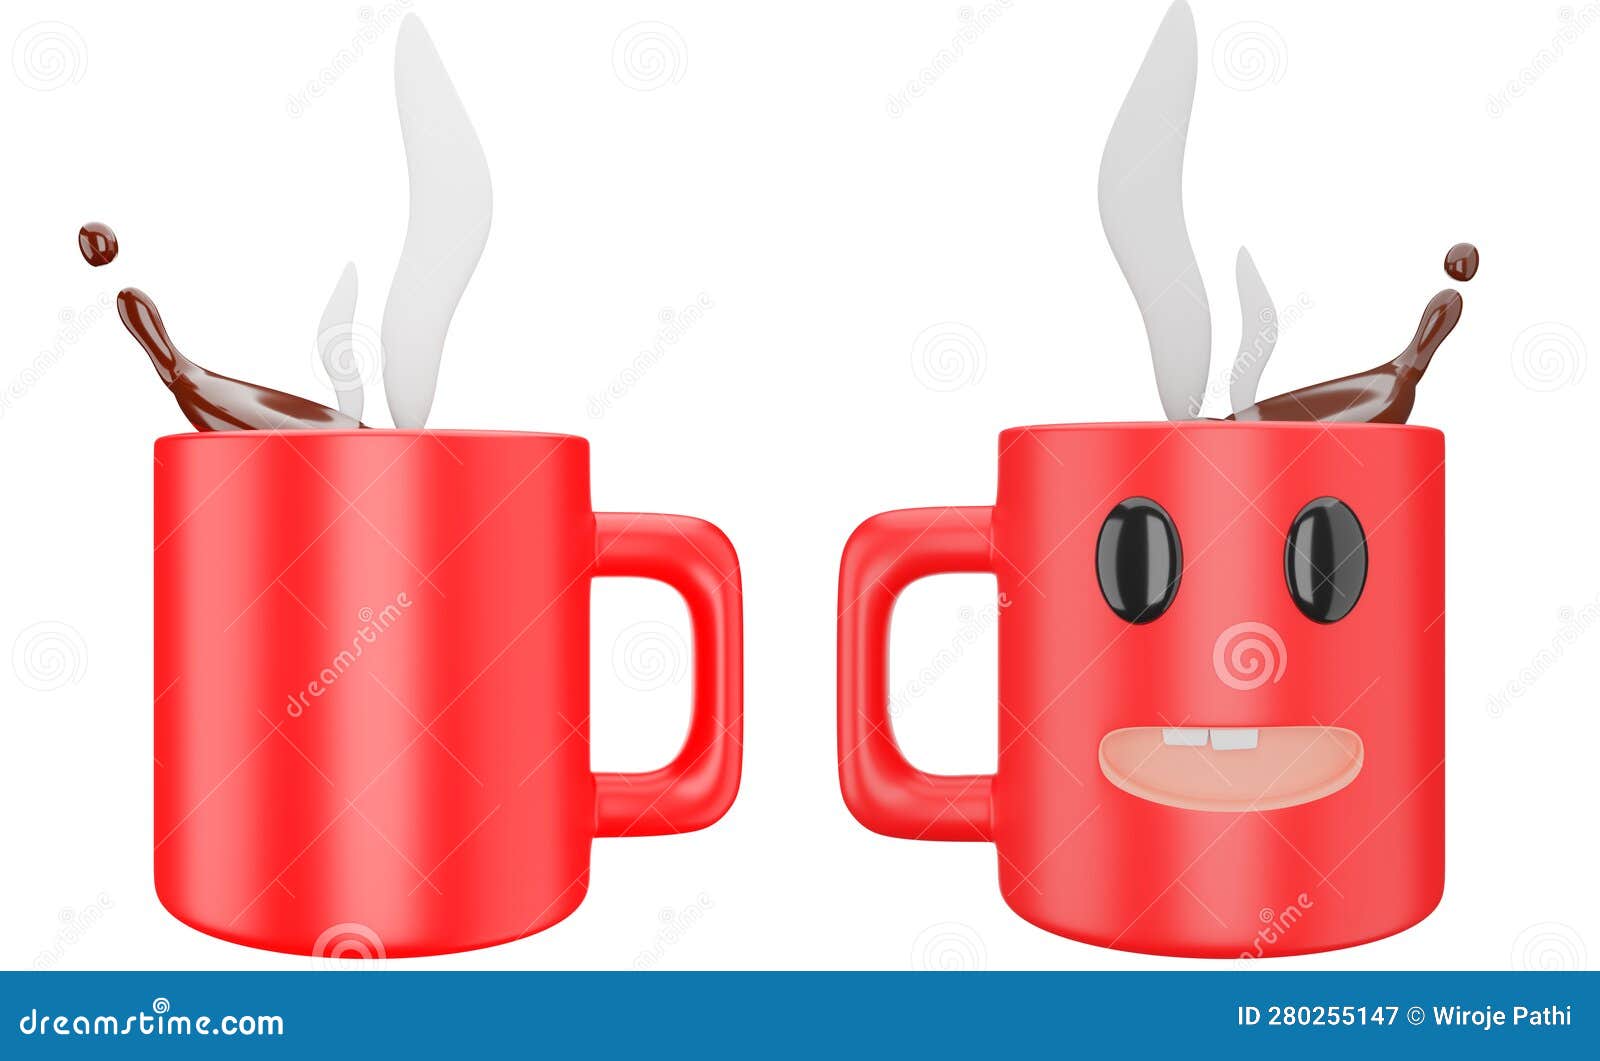 This is a free drink clip art image of a hot coffee mug cup.